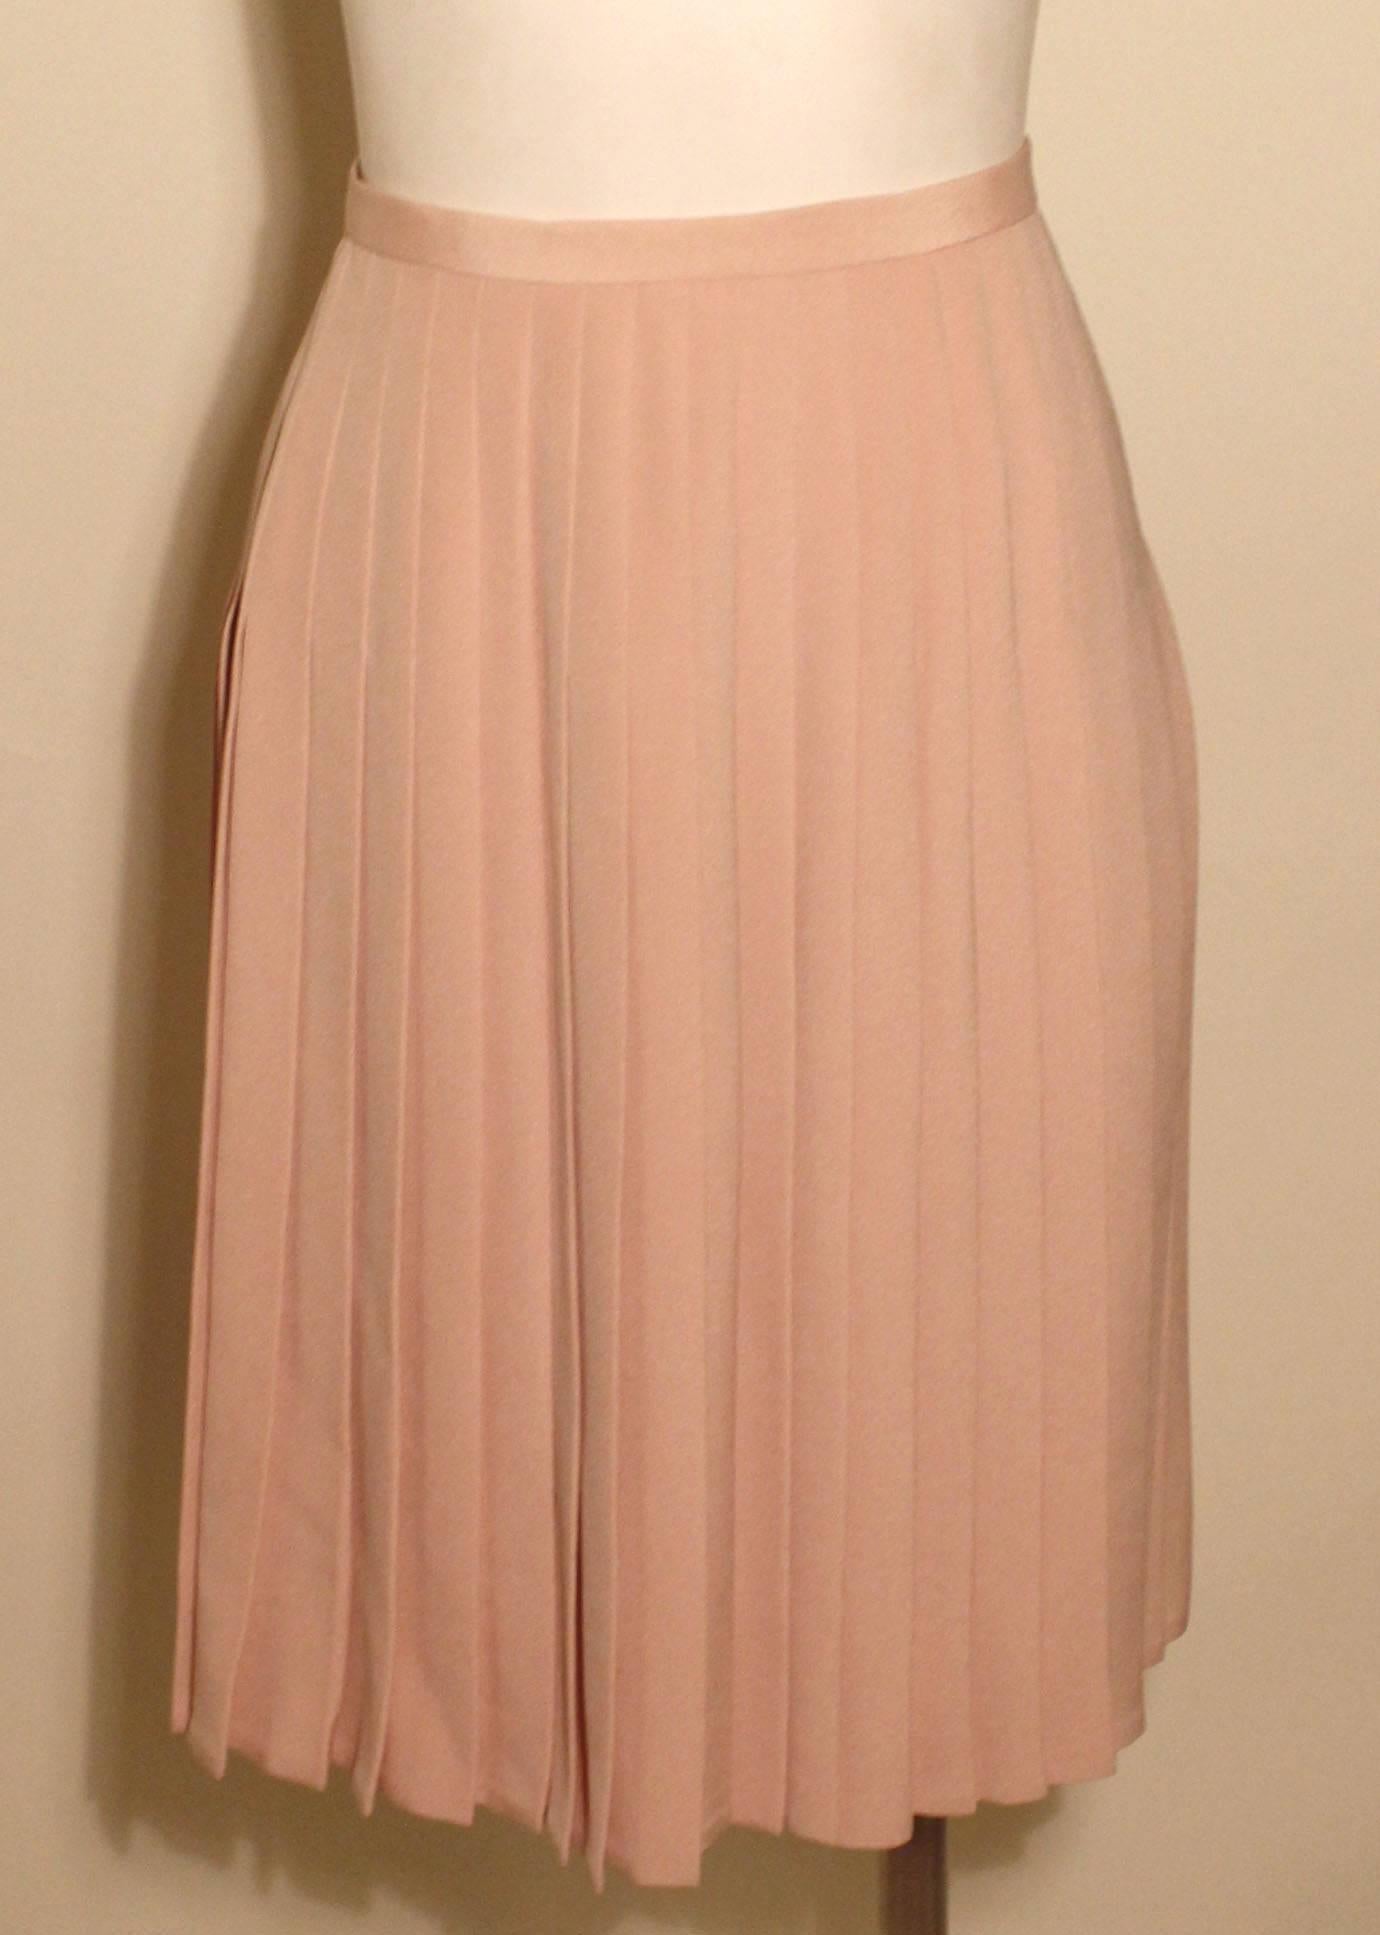 This Bill Blass skirt is a classic pleated style in a very appealing champagne pink. This flirty skirt is perfect for Valentines Day and to make any spring outfit brighter. 